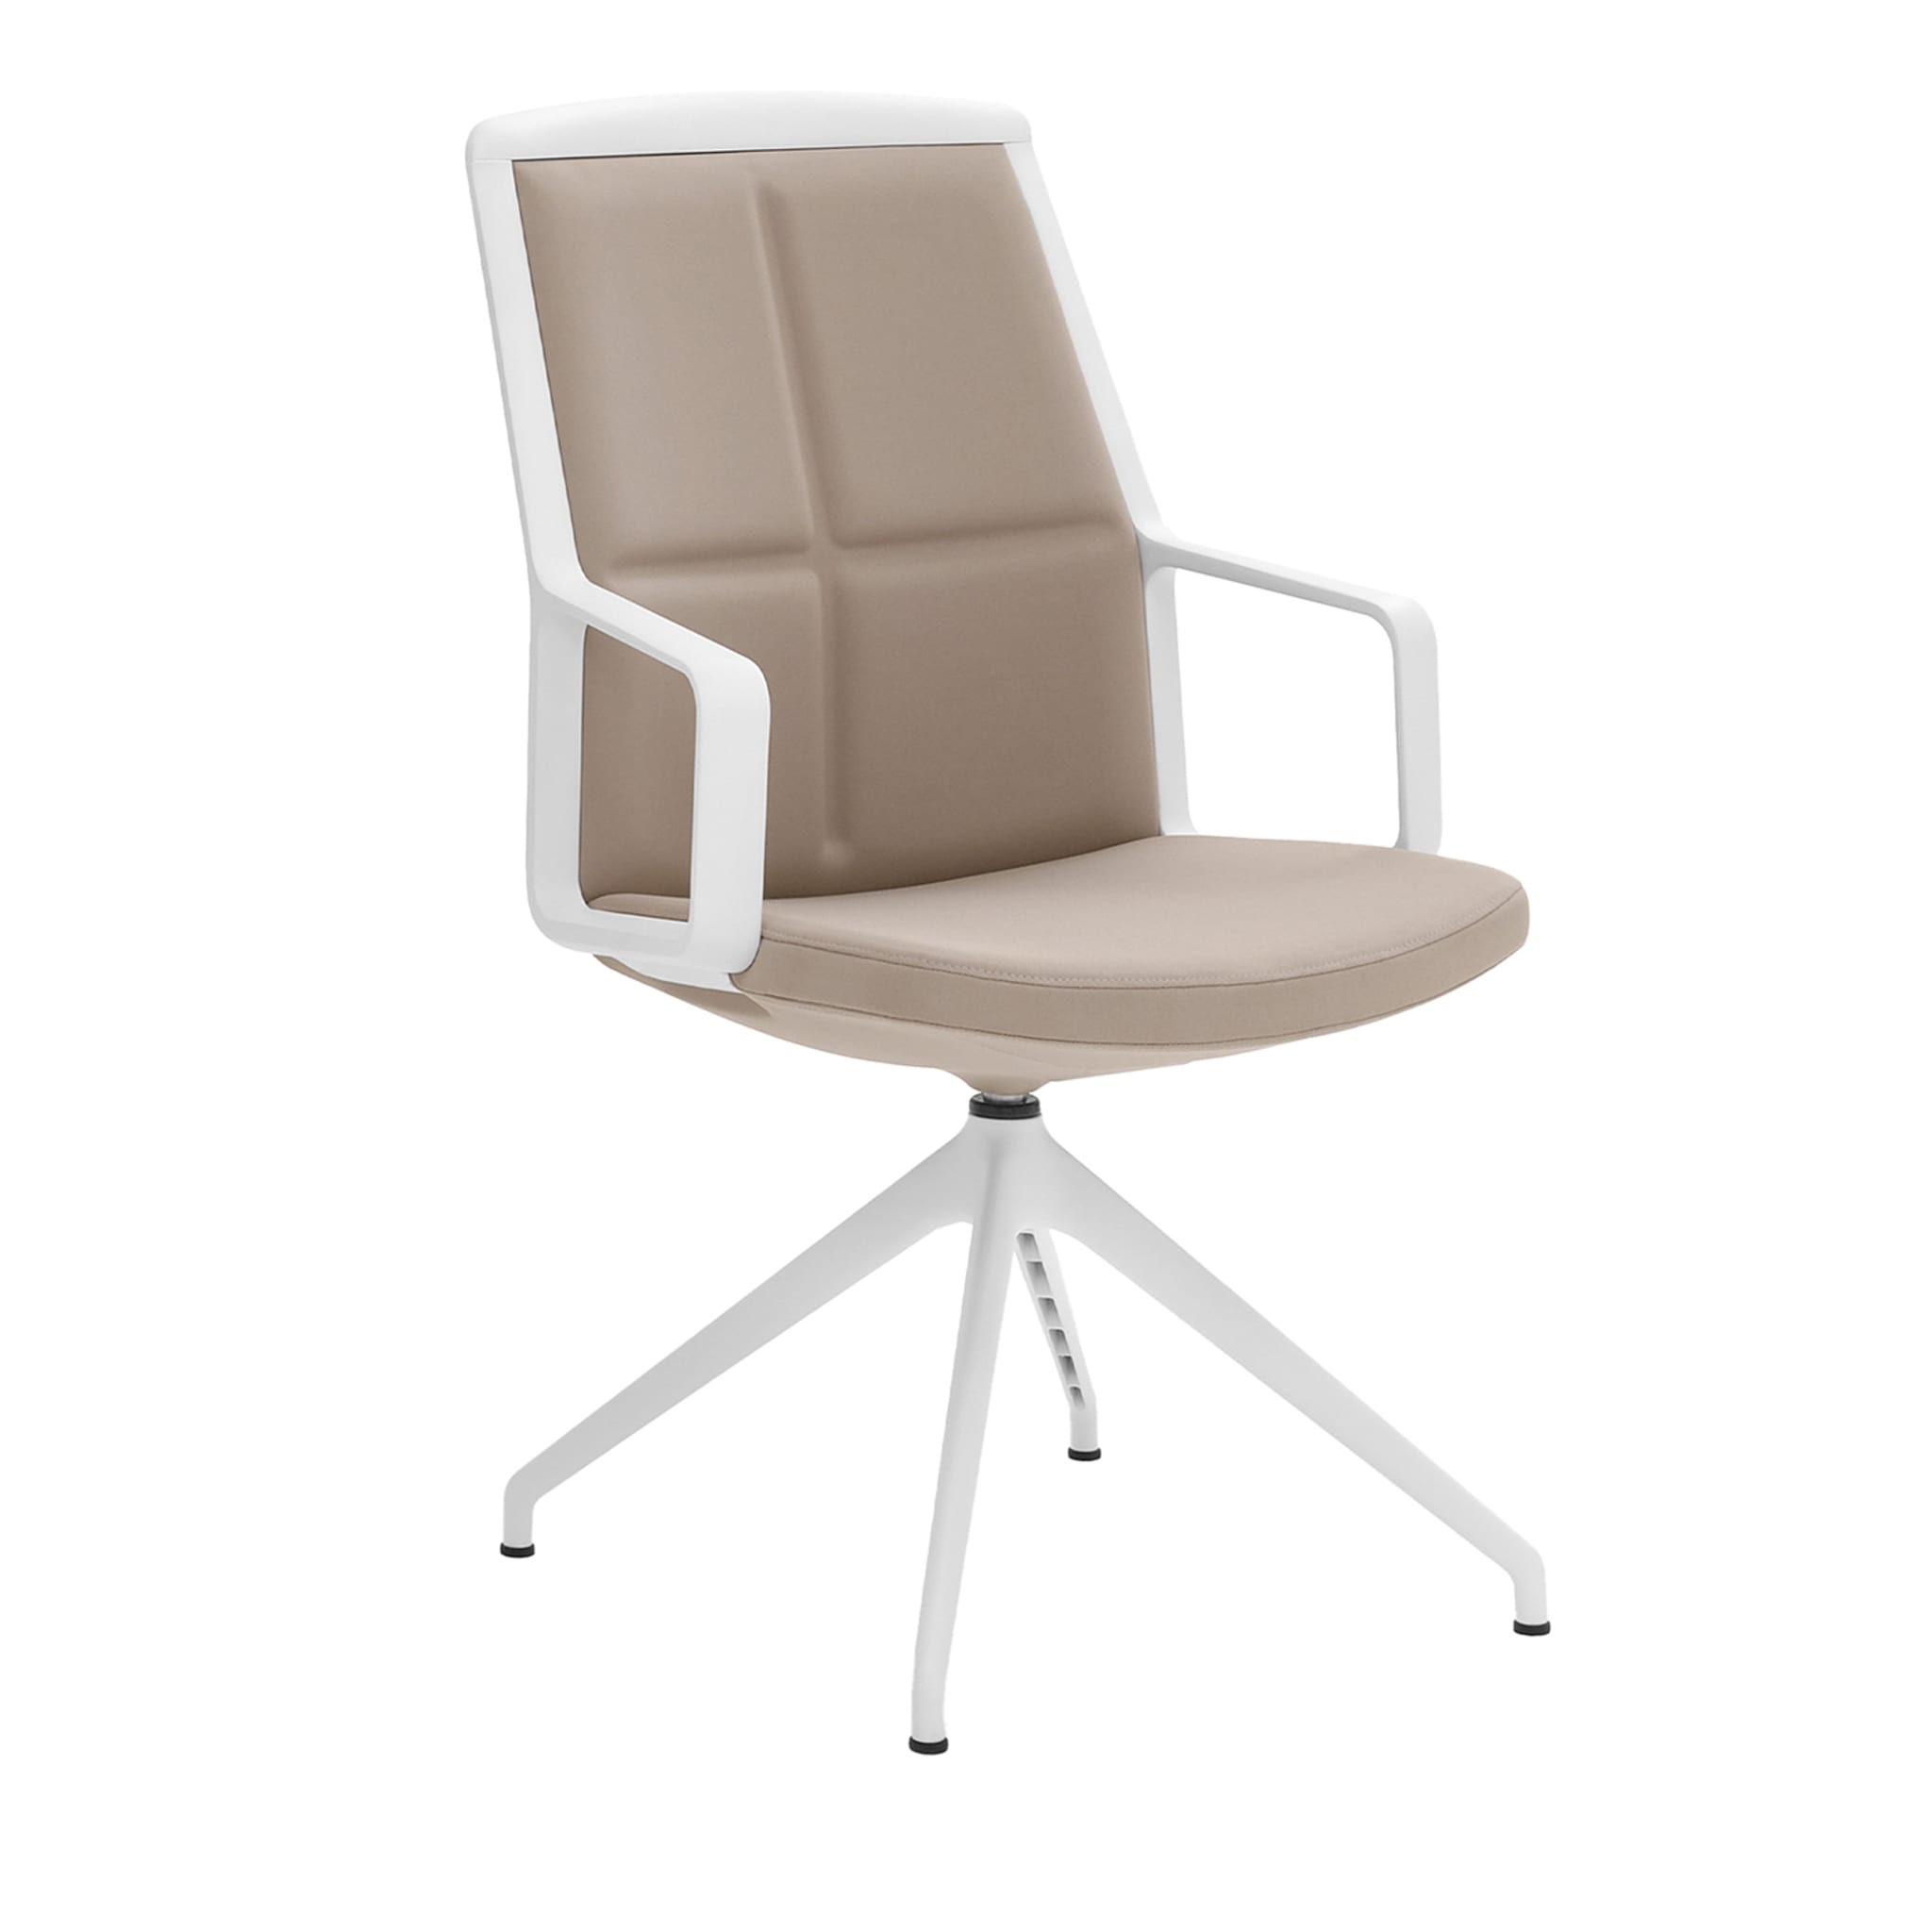 ADELE BEIGE MEETING CHAIR by ORLANDINIDESIGN - Main view